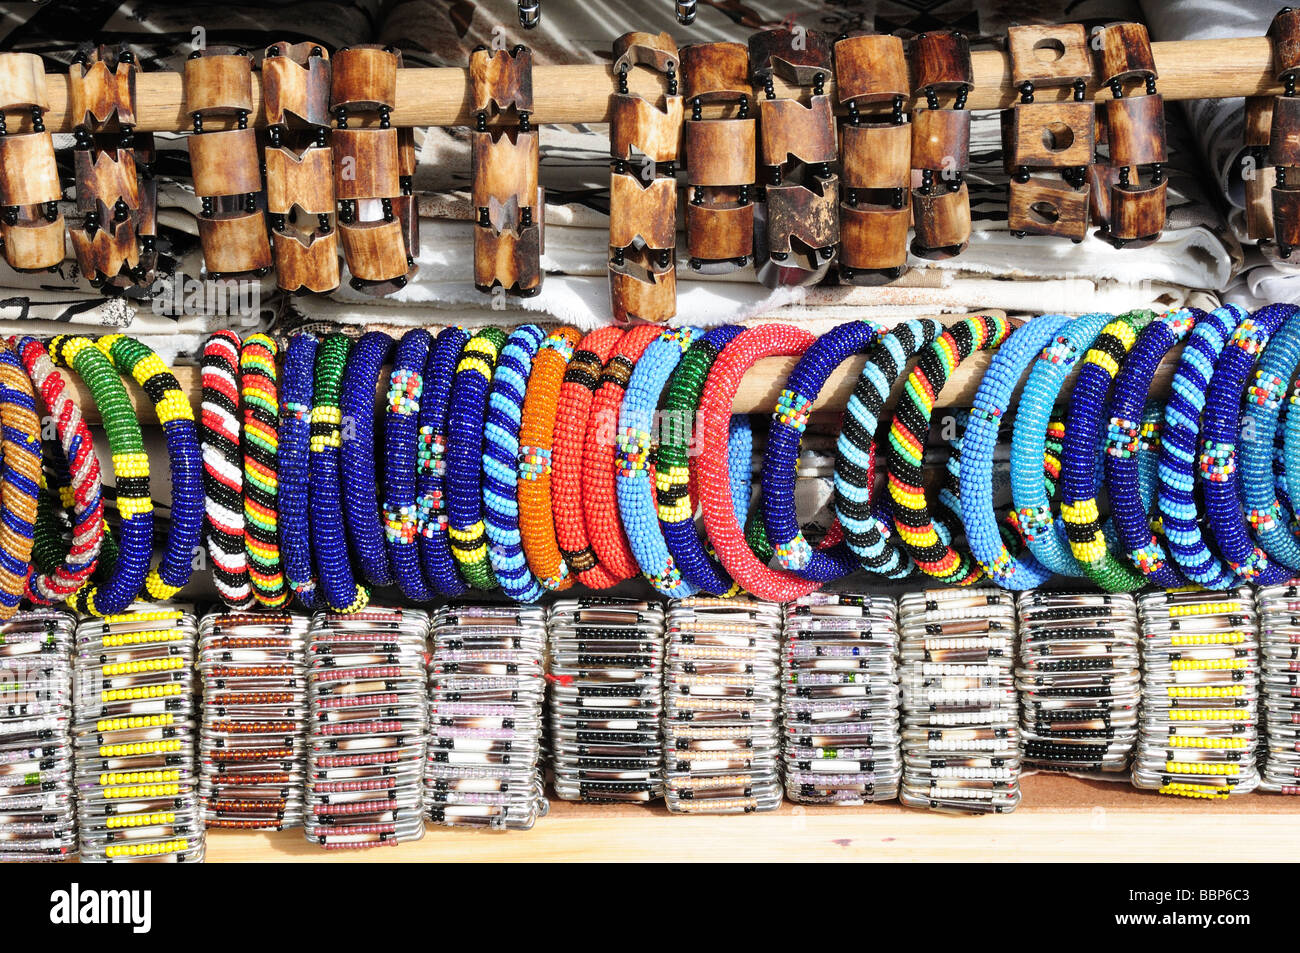 Beaded and wooden bangles for sale Kruger National Park South Africa Stock Photo